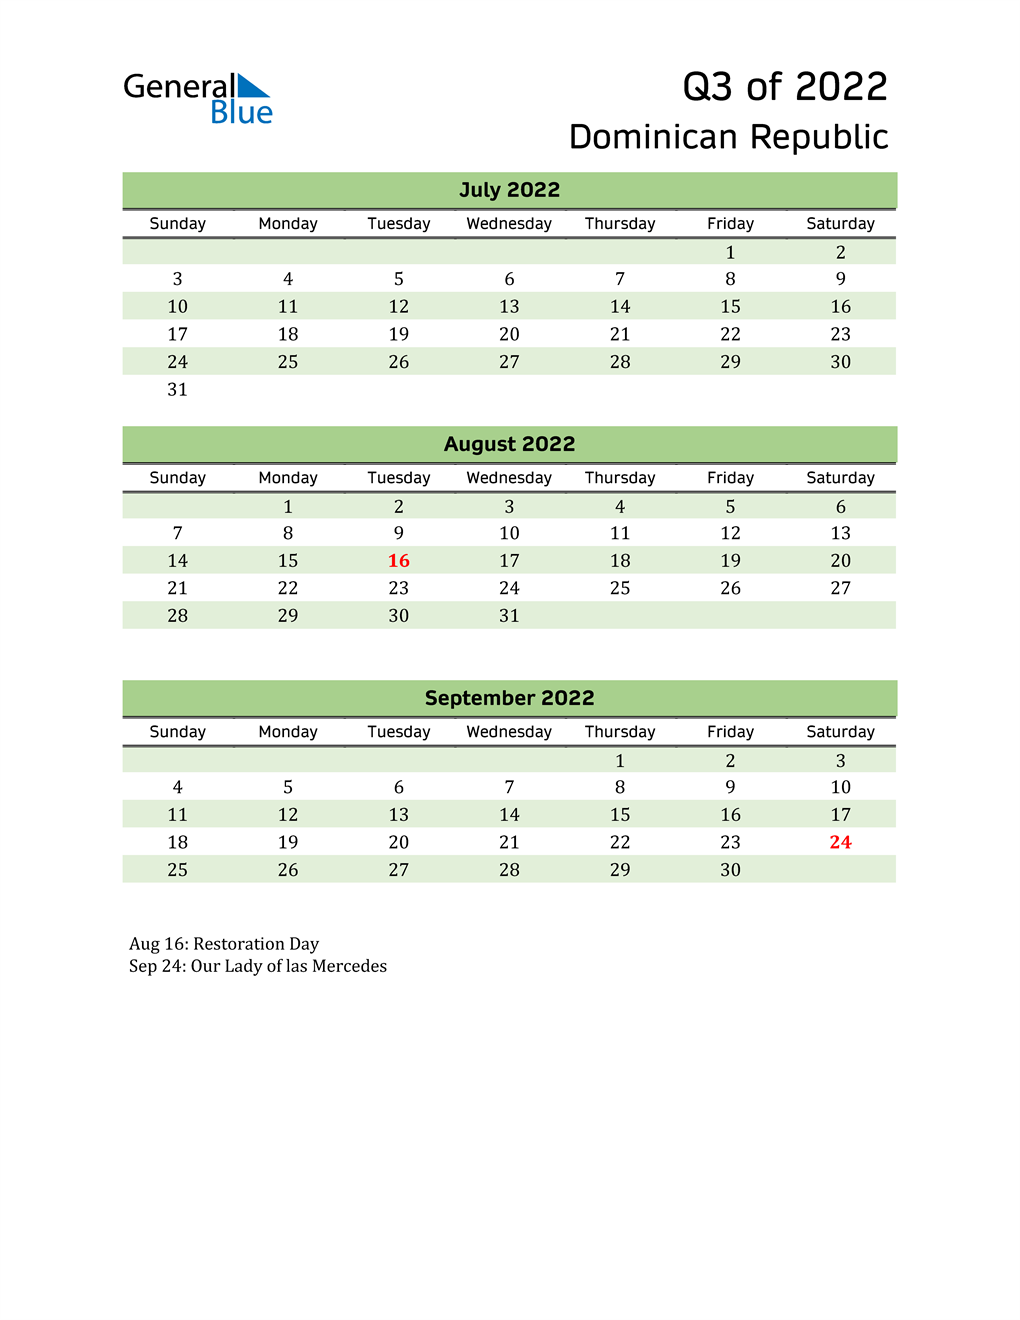  Quarterly Calendar 2022 with Dominican Republic Holidays 